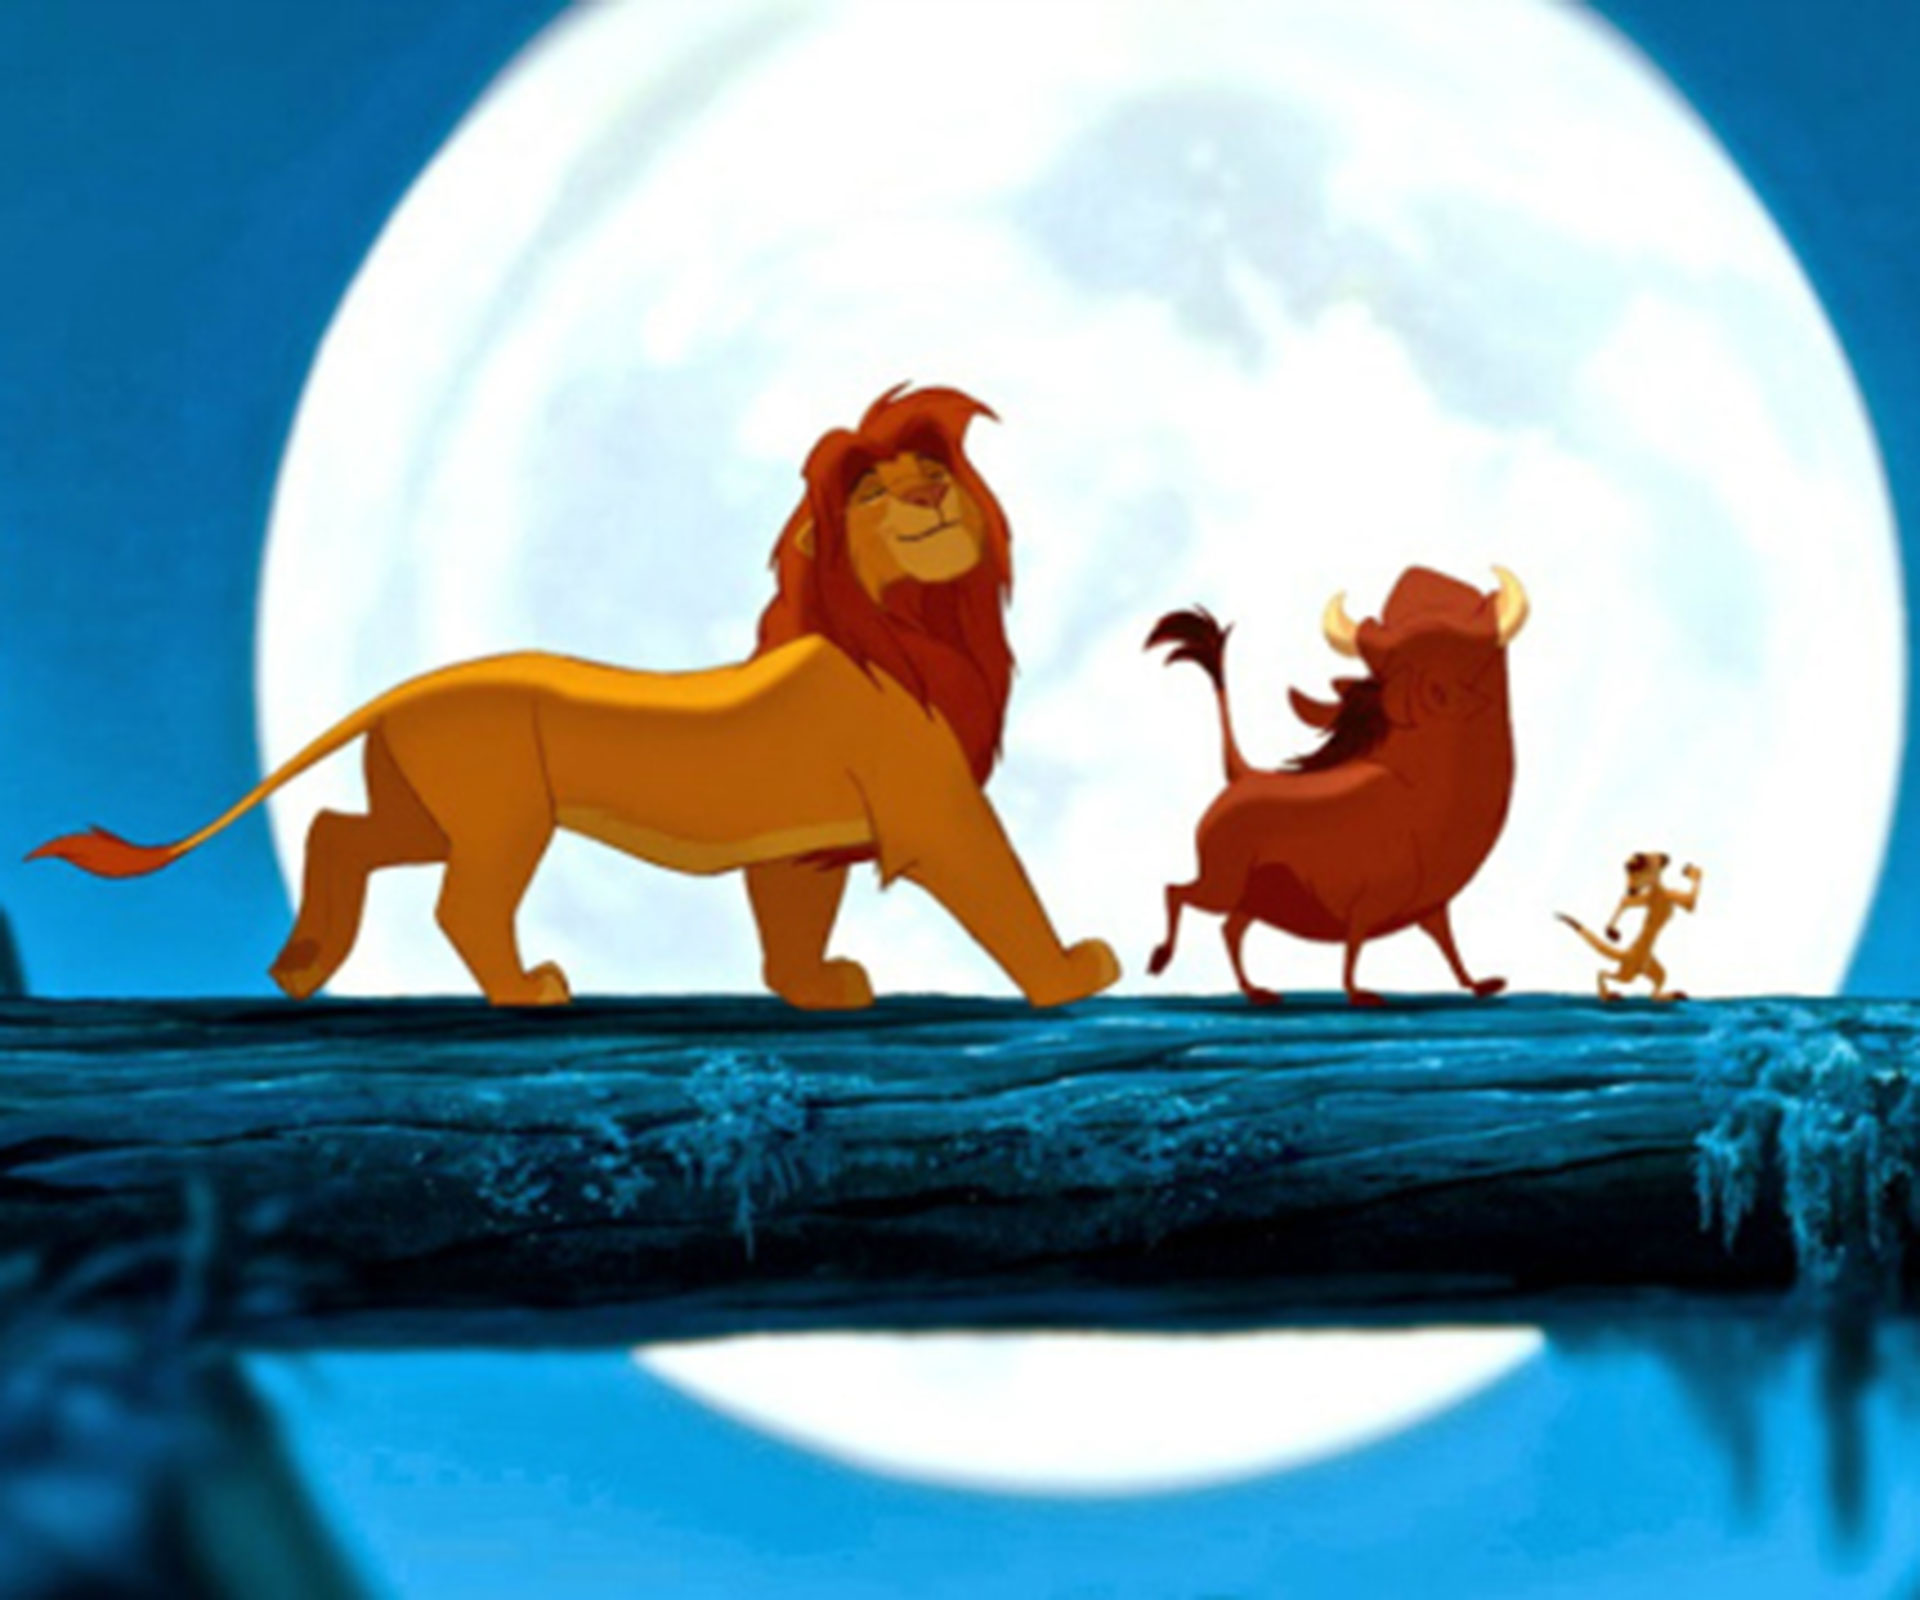 Disney announces new Lion King movie – but not all fans are happy